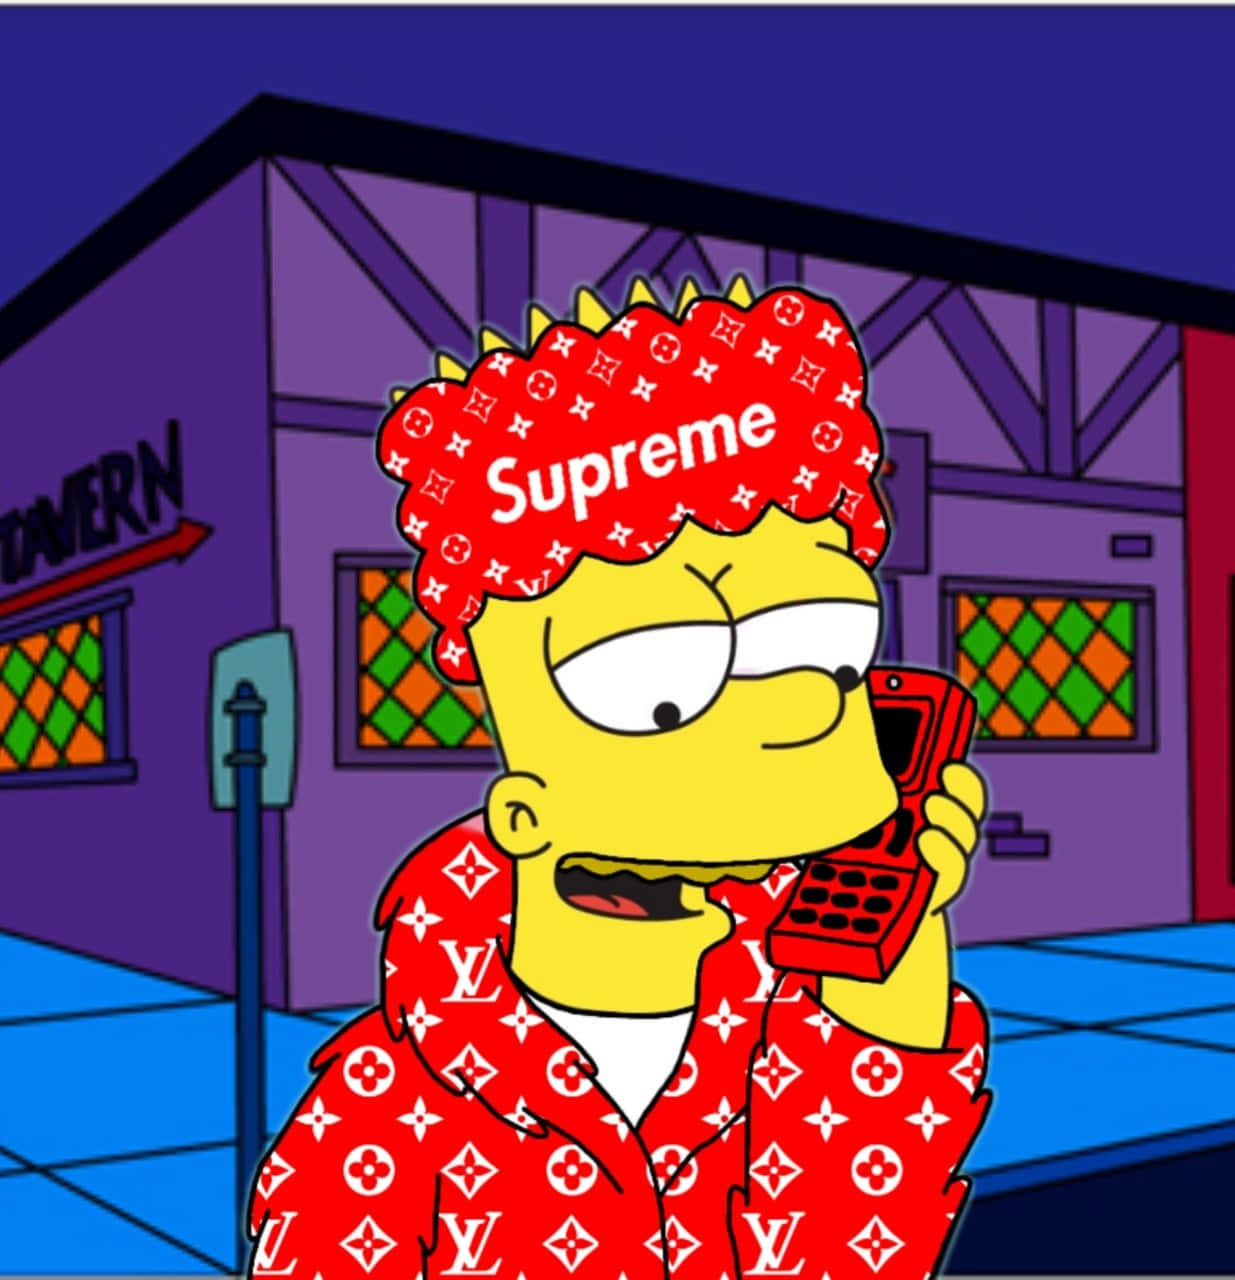 Supreme Bart Simpson Flexes His Style And Swagger